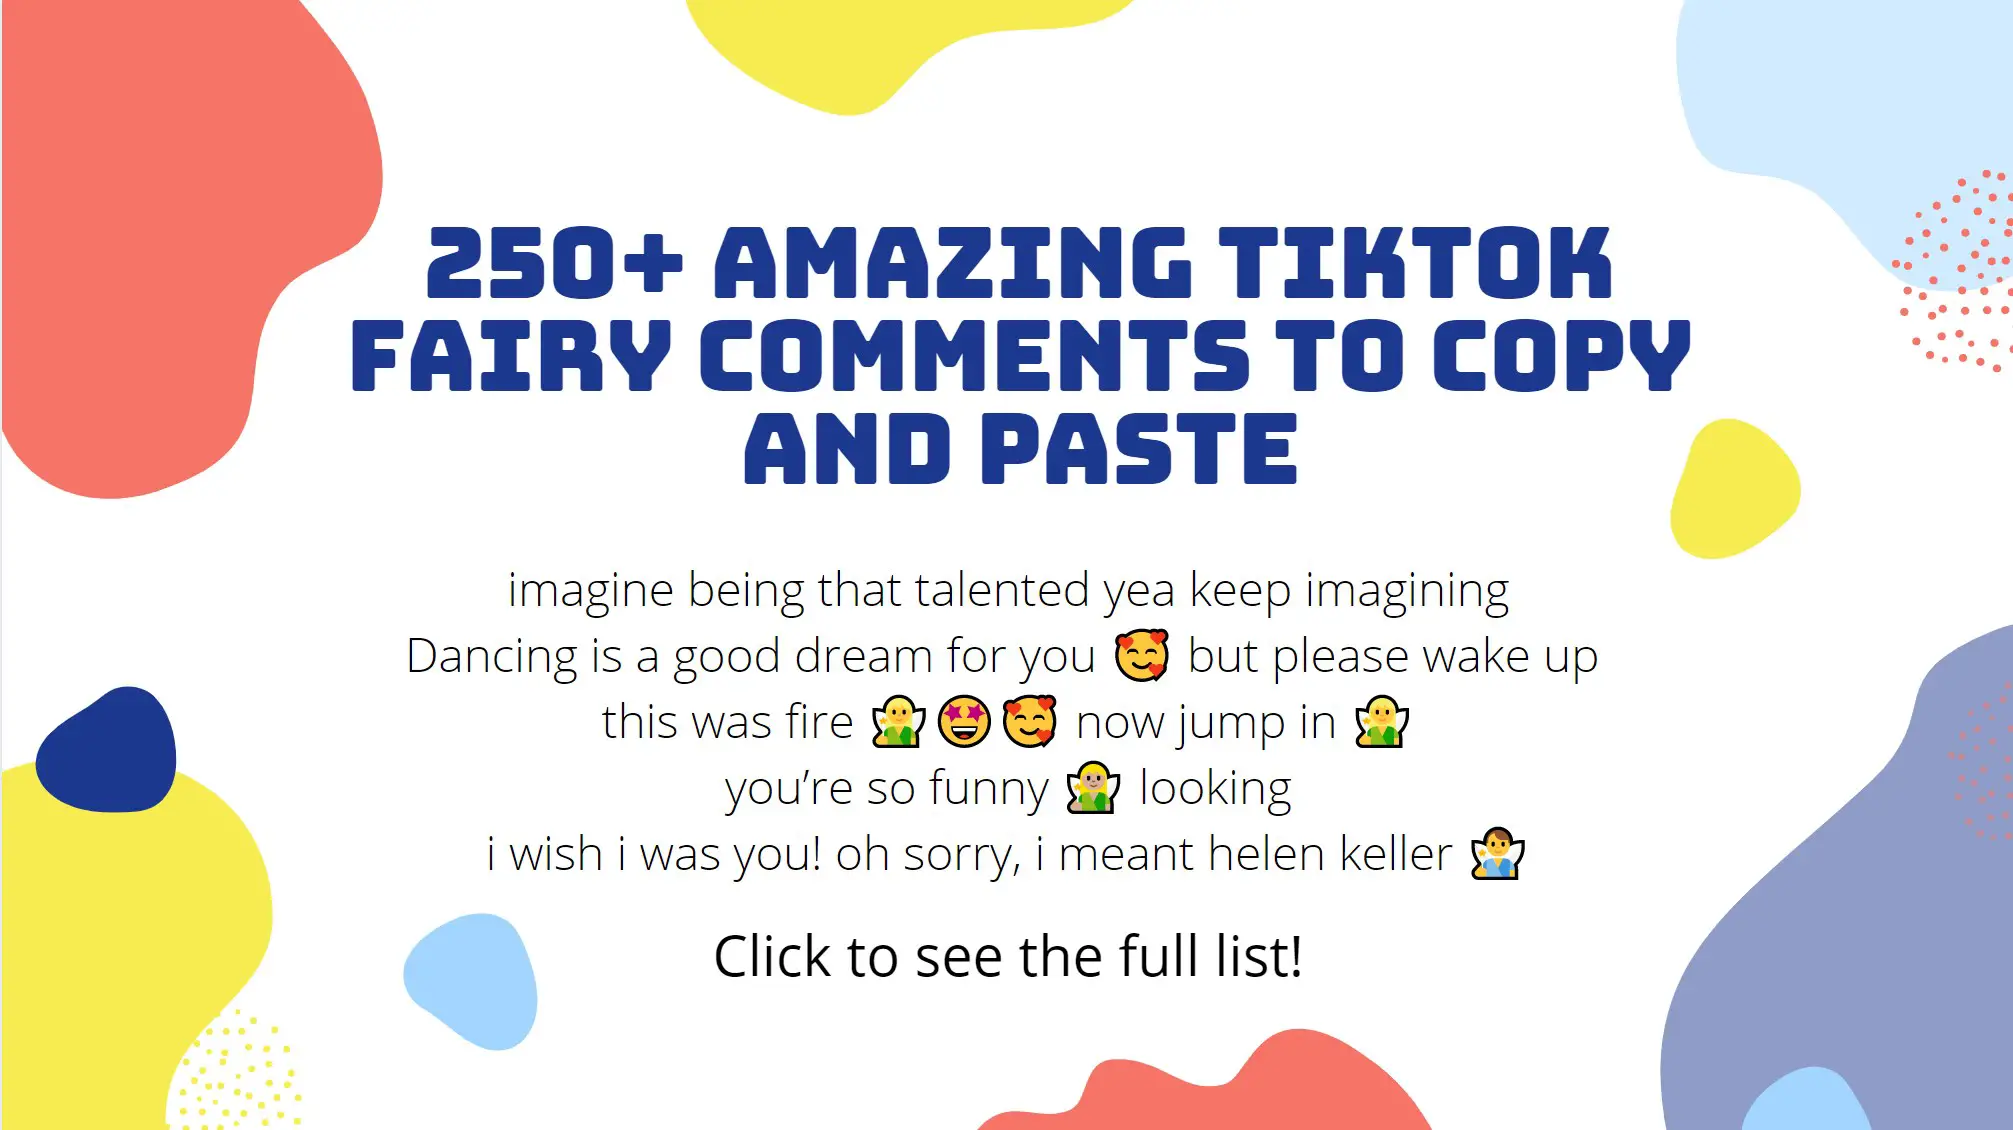 250-amazing-tiktok-fairy-comments-you-can-use-to-copy-and-paste